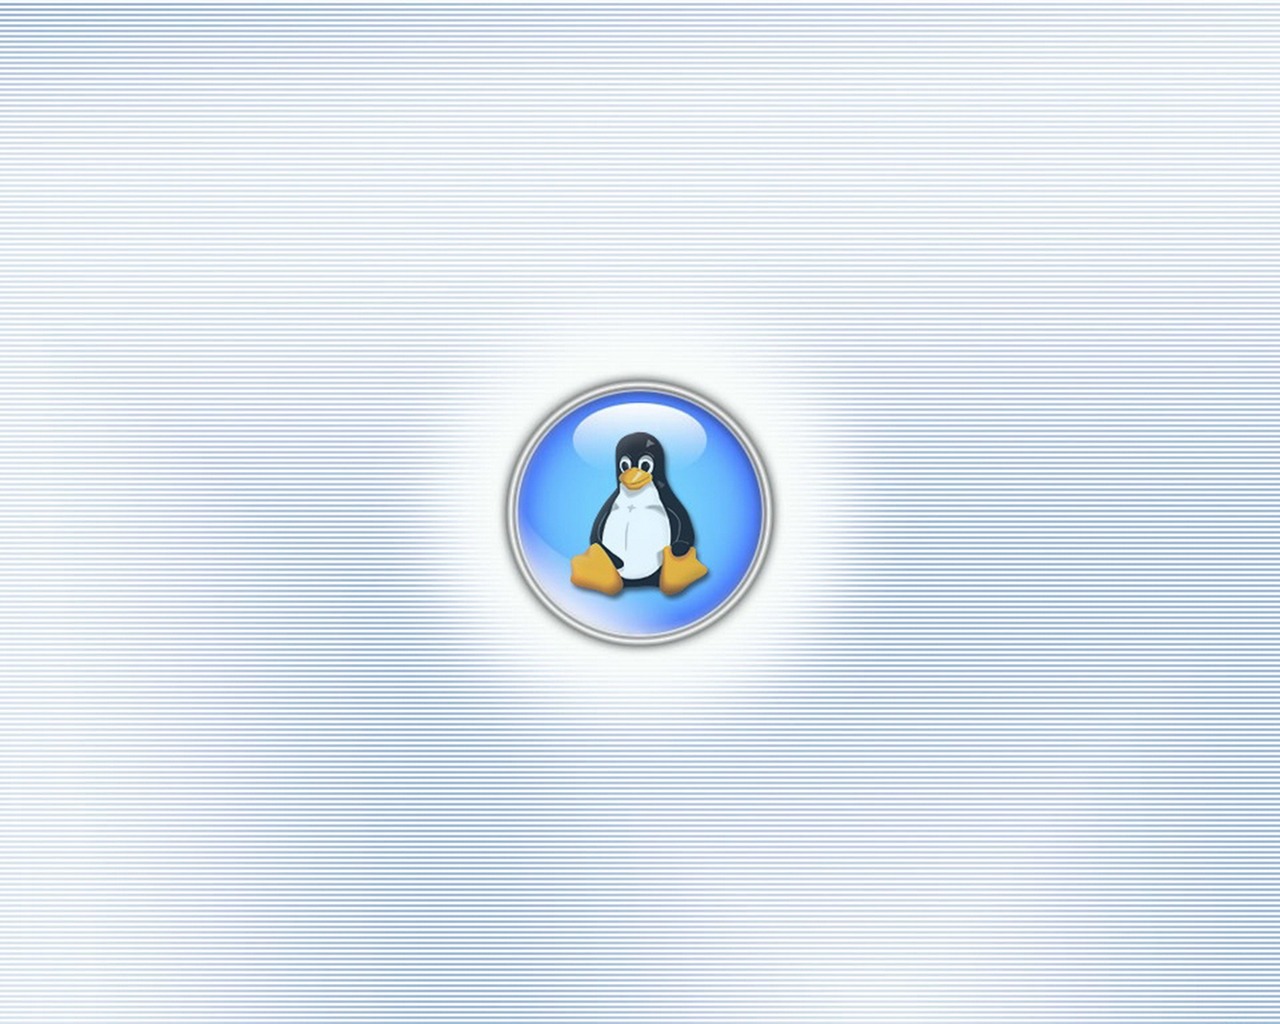 Linux tapety (1) #17 - 1280x1024